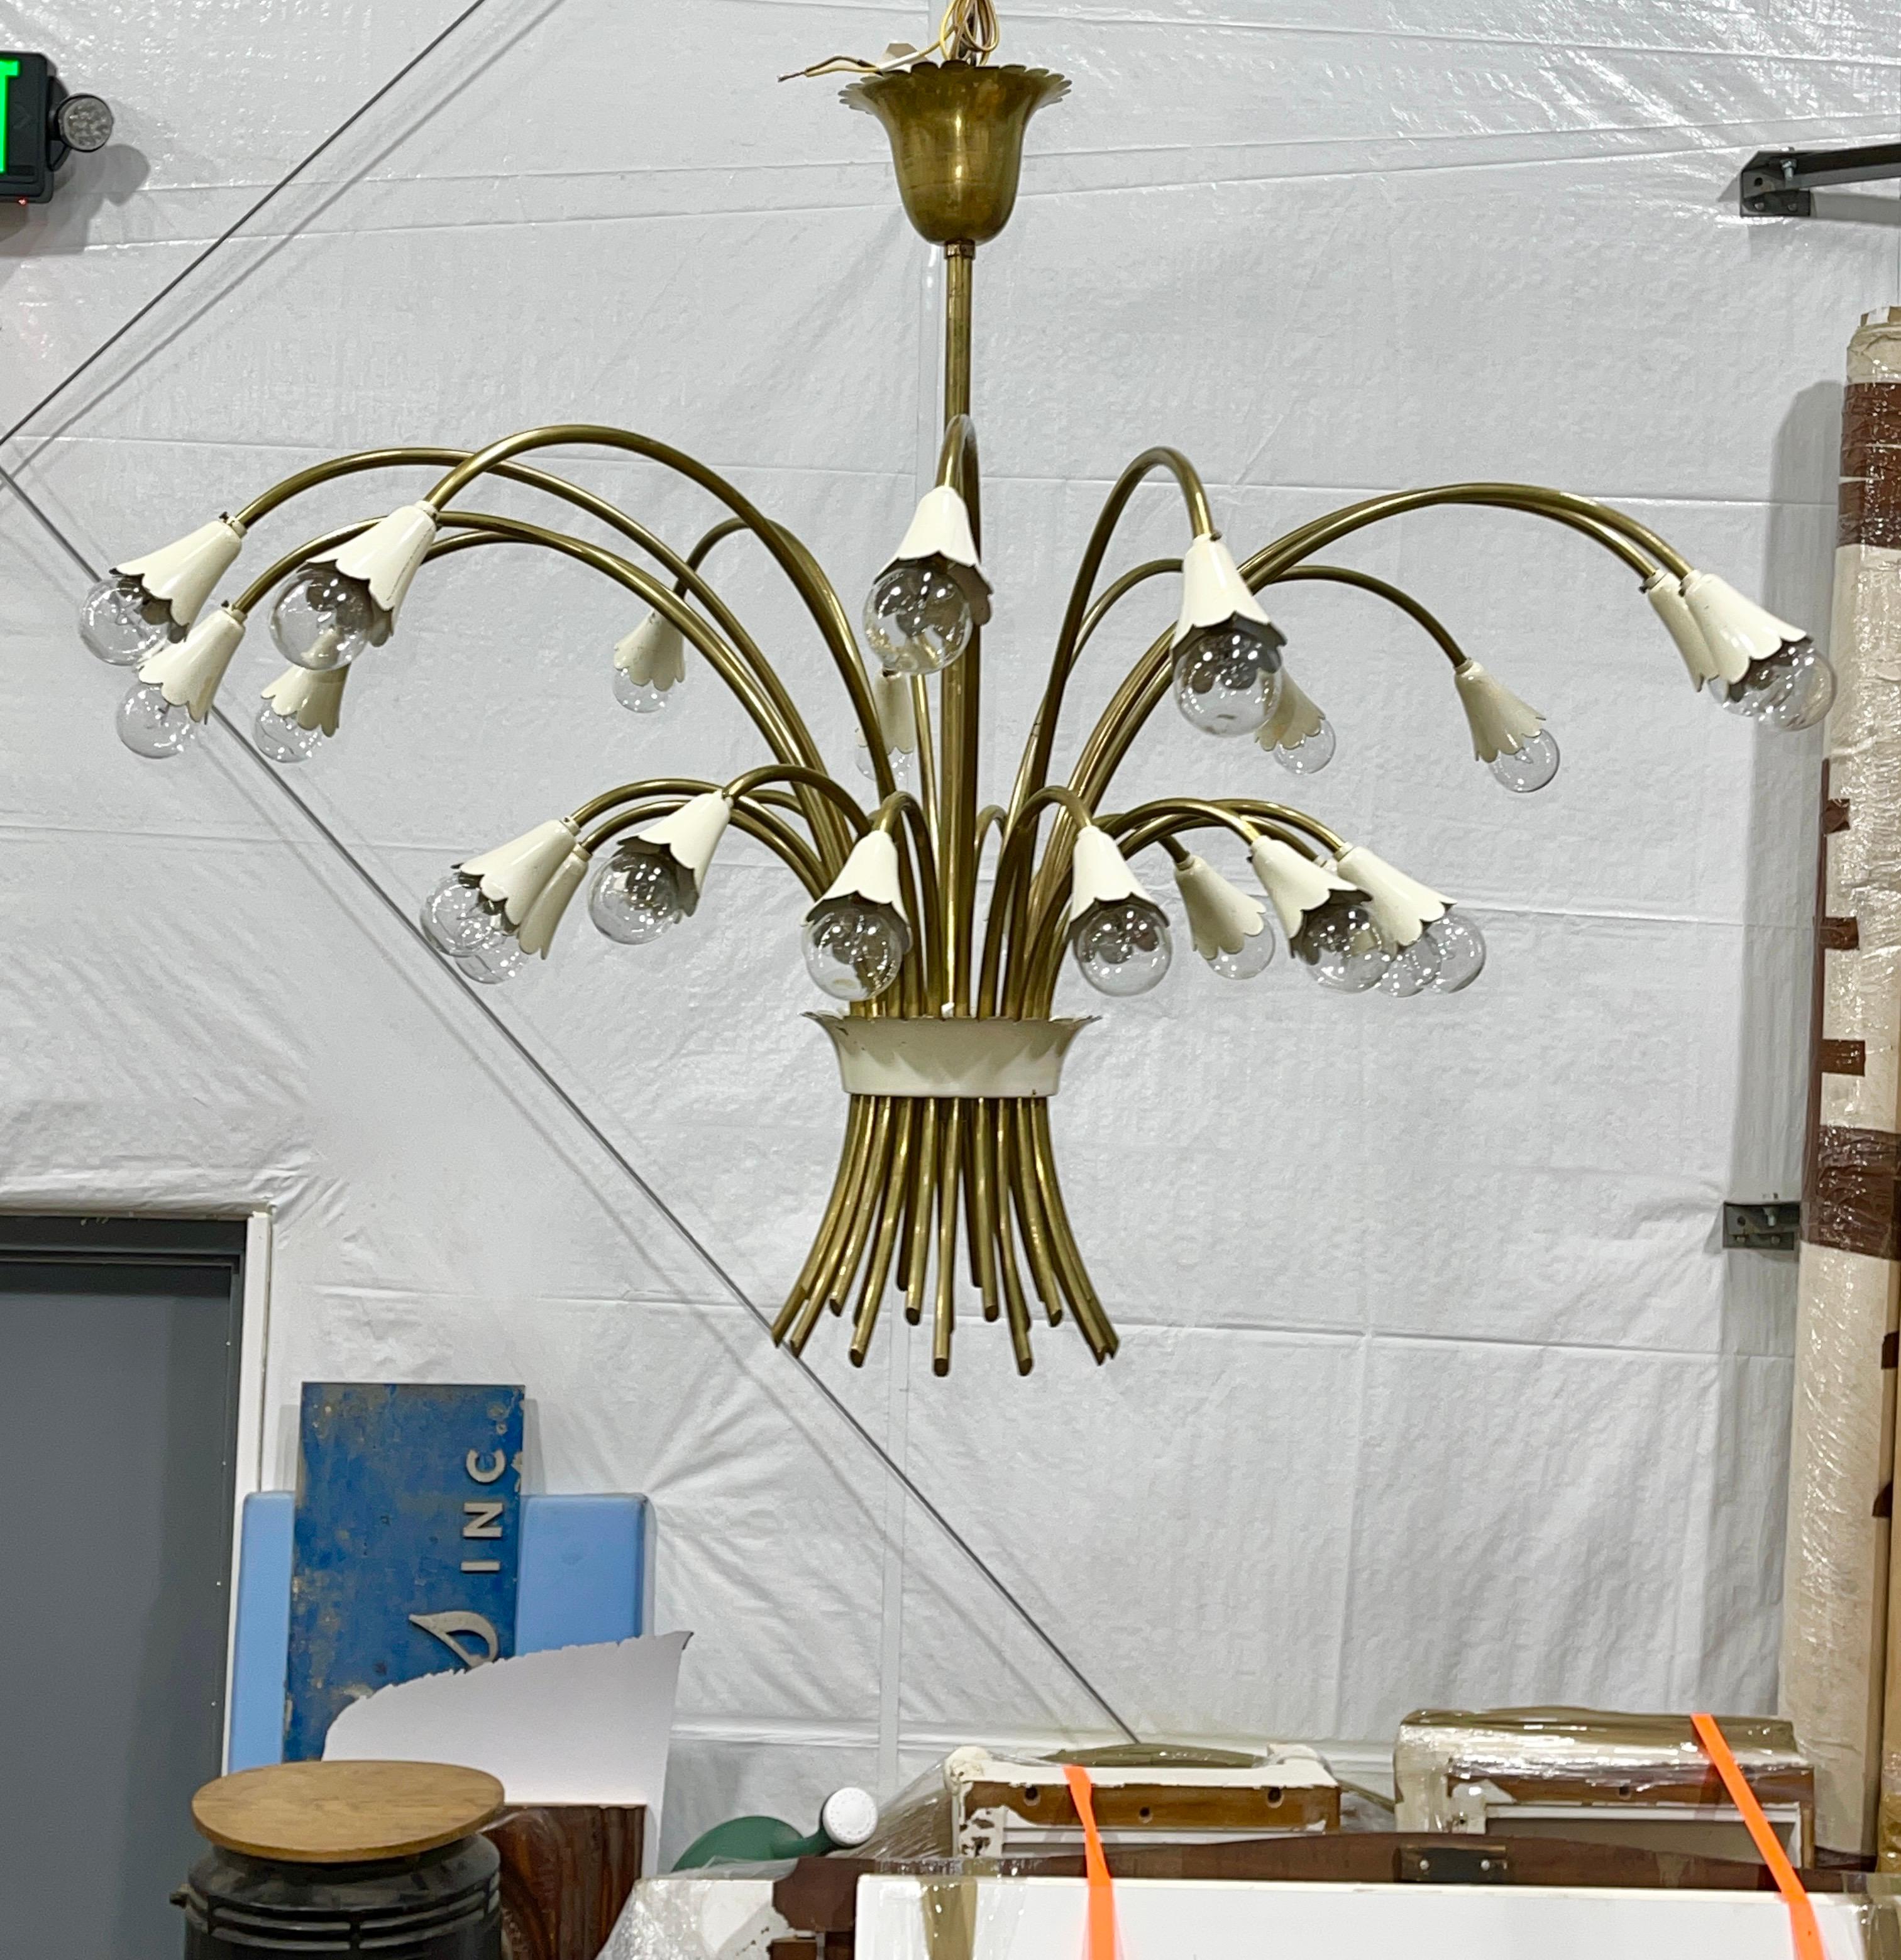 Monumental Italian 1950's botanical bouquet form chandelier with 24 lights at the ends of 24 curved brass tubular arms.
Rewired.
Original brass and porcelain E14 candelabra sockets with adapters for use with American E12 candelabra size